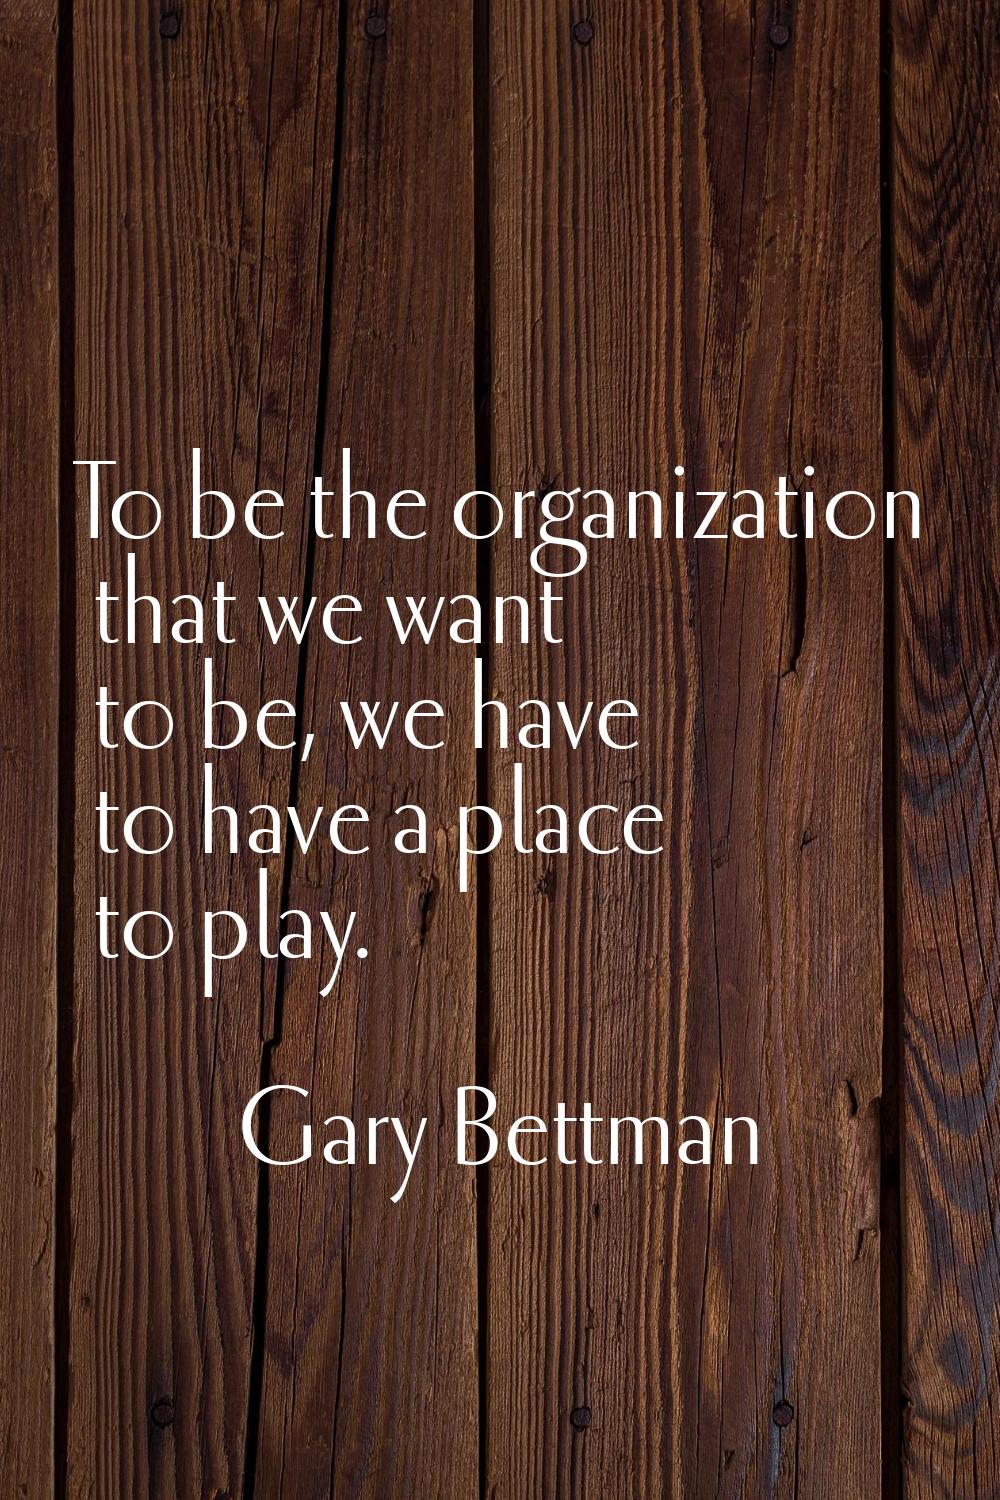 To be the organization that we want to be, we have to have a place to play.